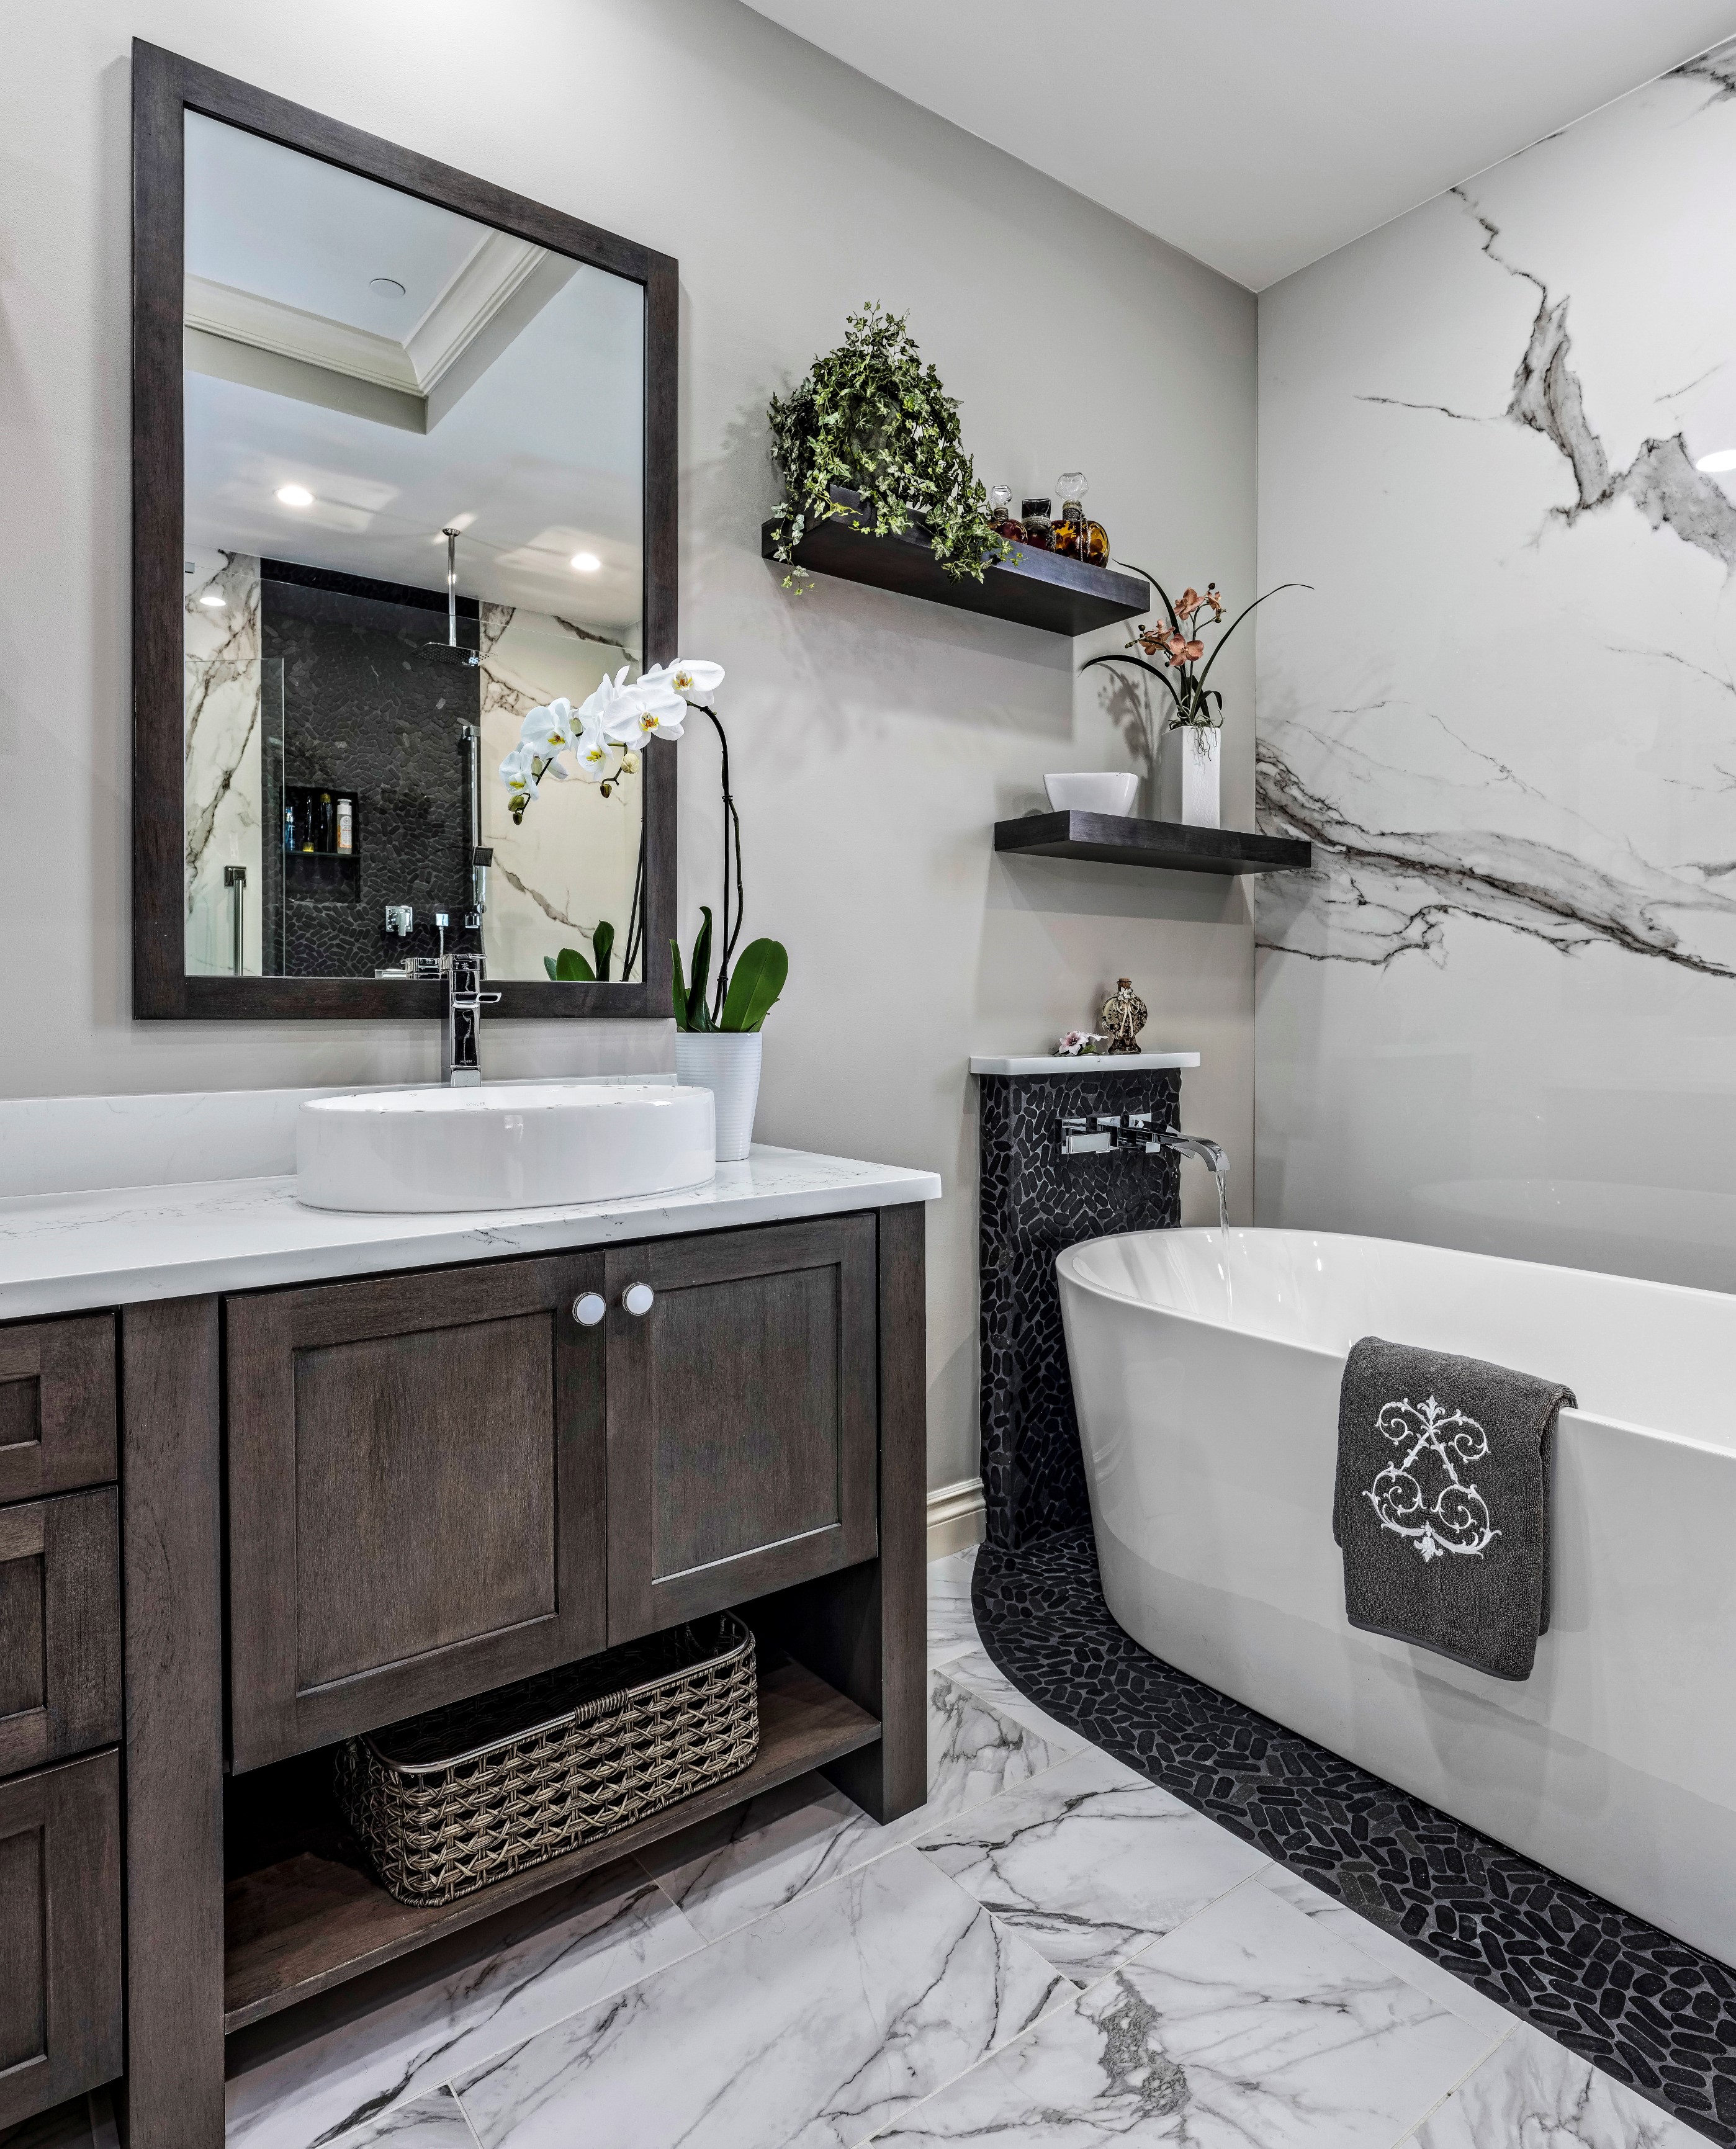 Does Bathroom Remodeling Typically Cost, Remodel Bathroom Pictures